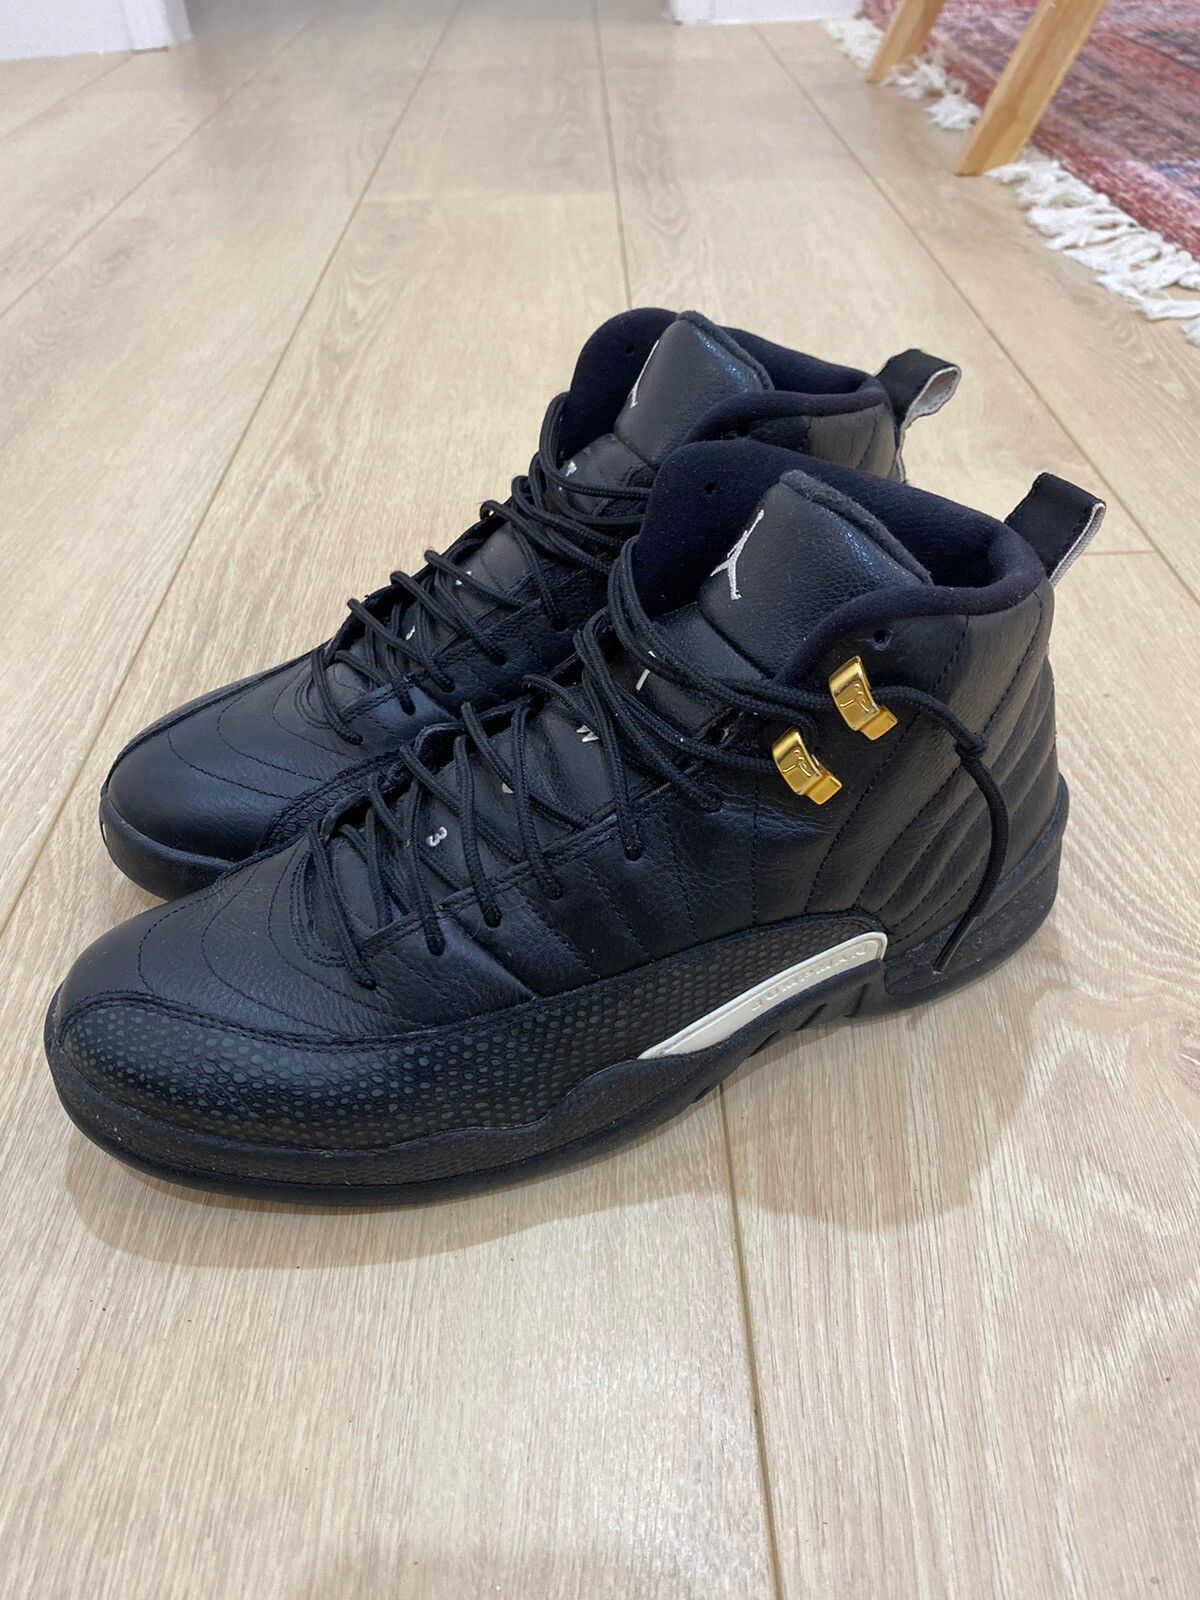 Pre-owned Jordan Brand 12 The Master (2016) Shoes In Black